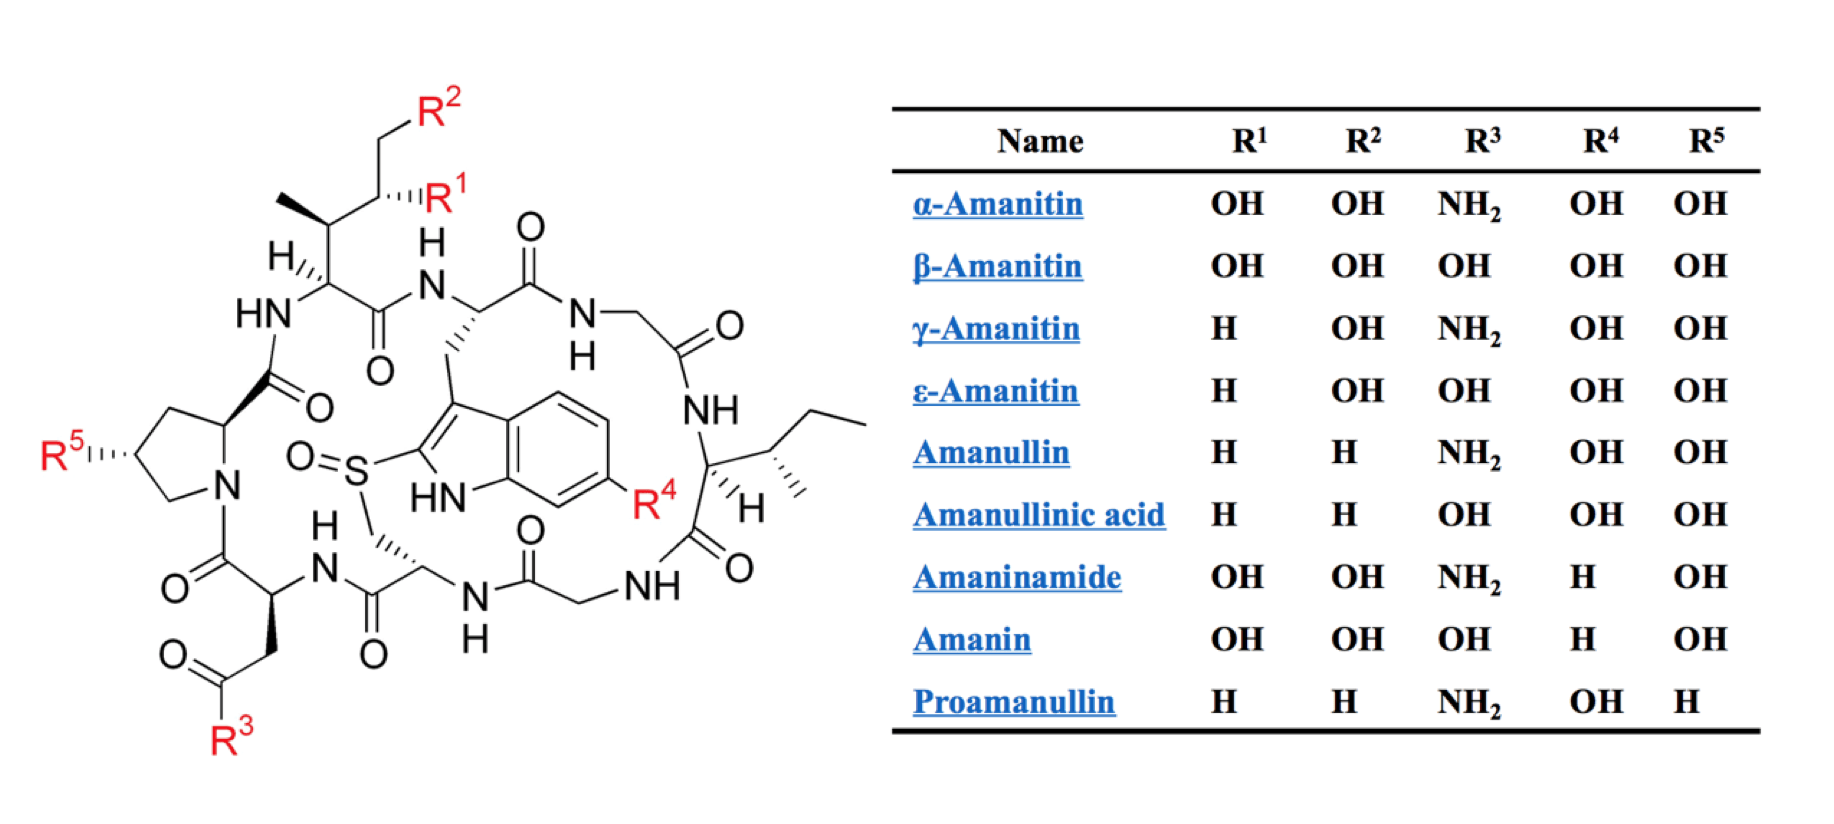  Cyclic  octapeptide  structure of amatoxin and its variants. Amatoxins are chemically versatile with  different modifications on the “R” groups generate at least 9 variants.